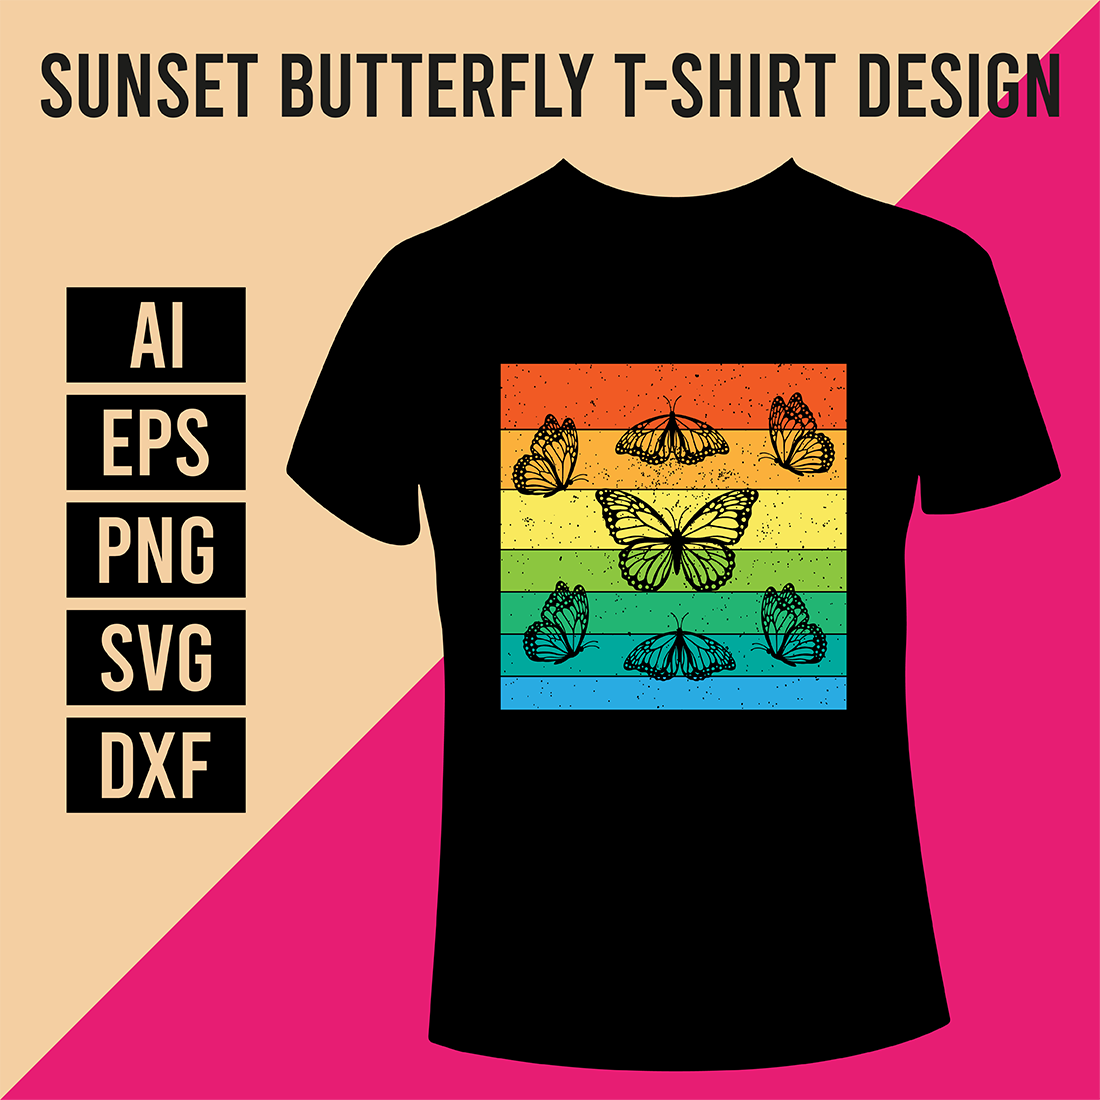 Sunset Butterfly T-Shirt Design cover image.